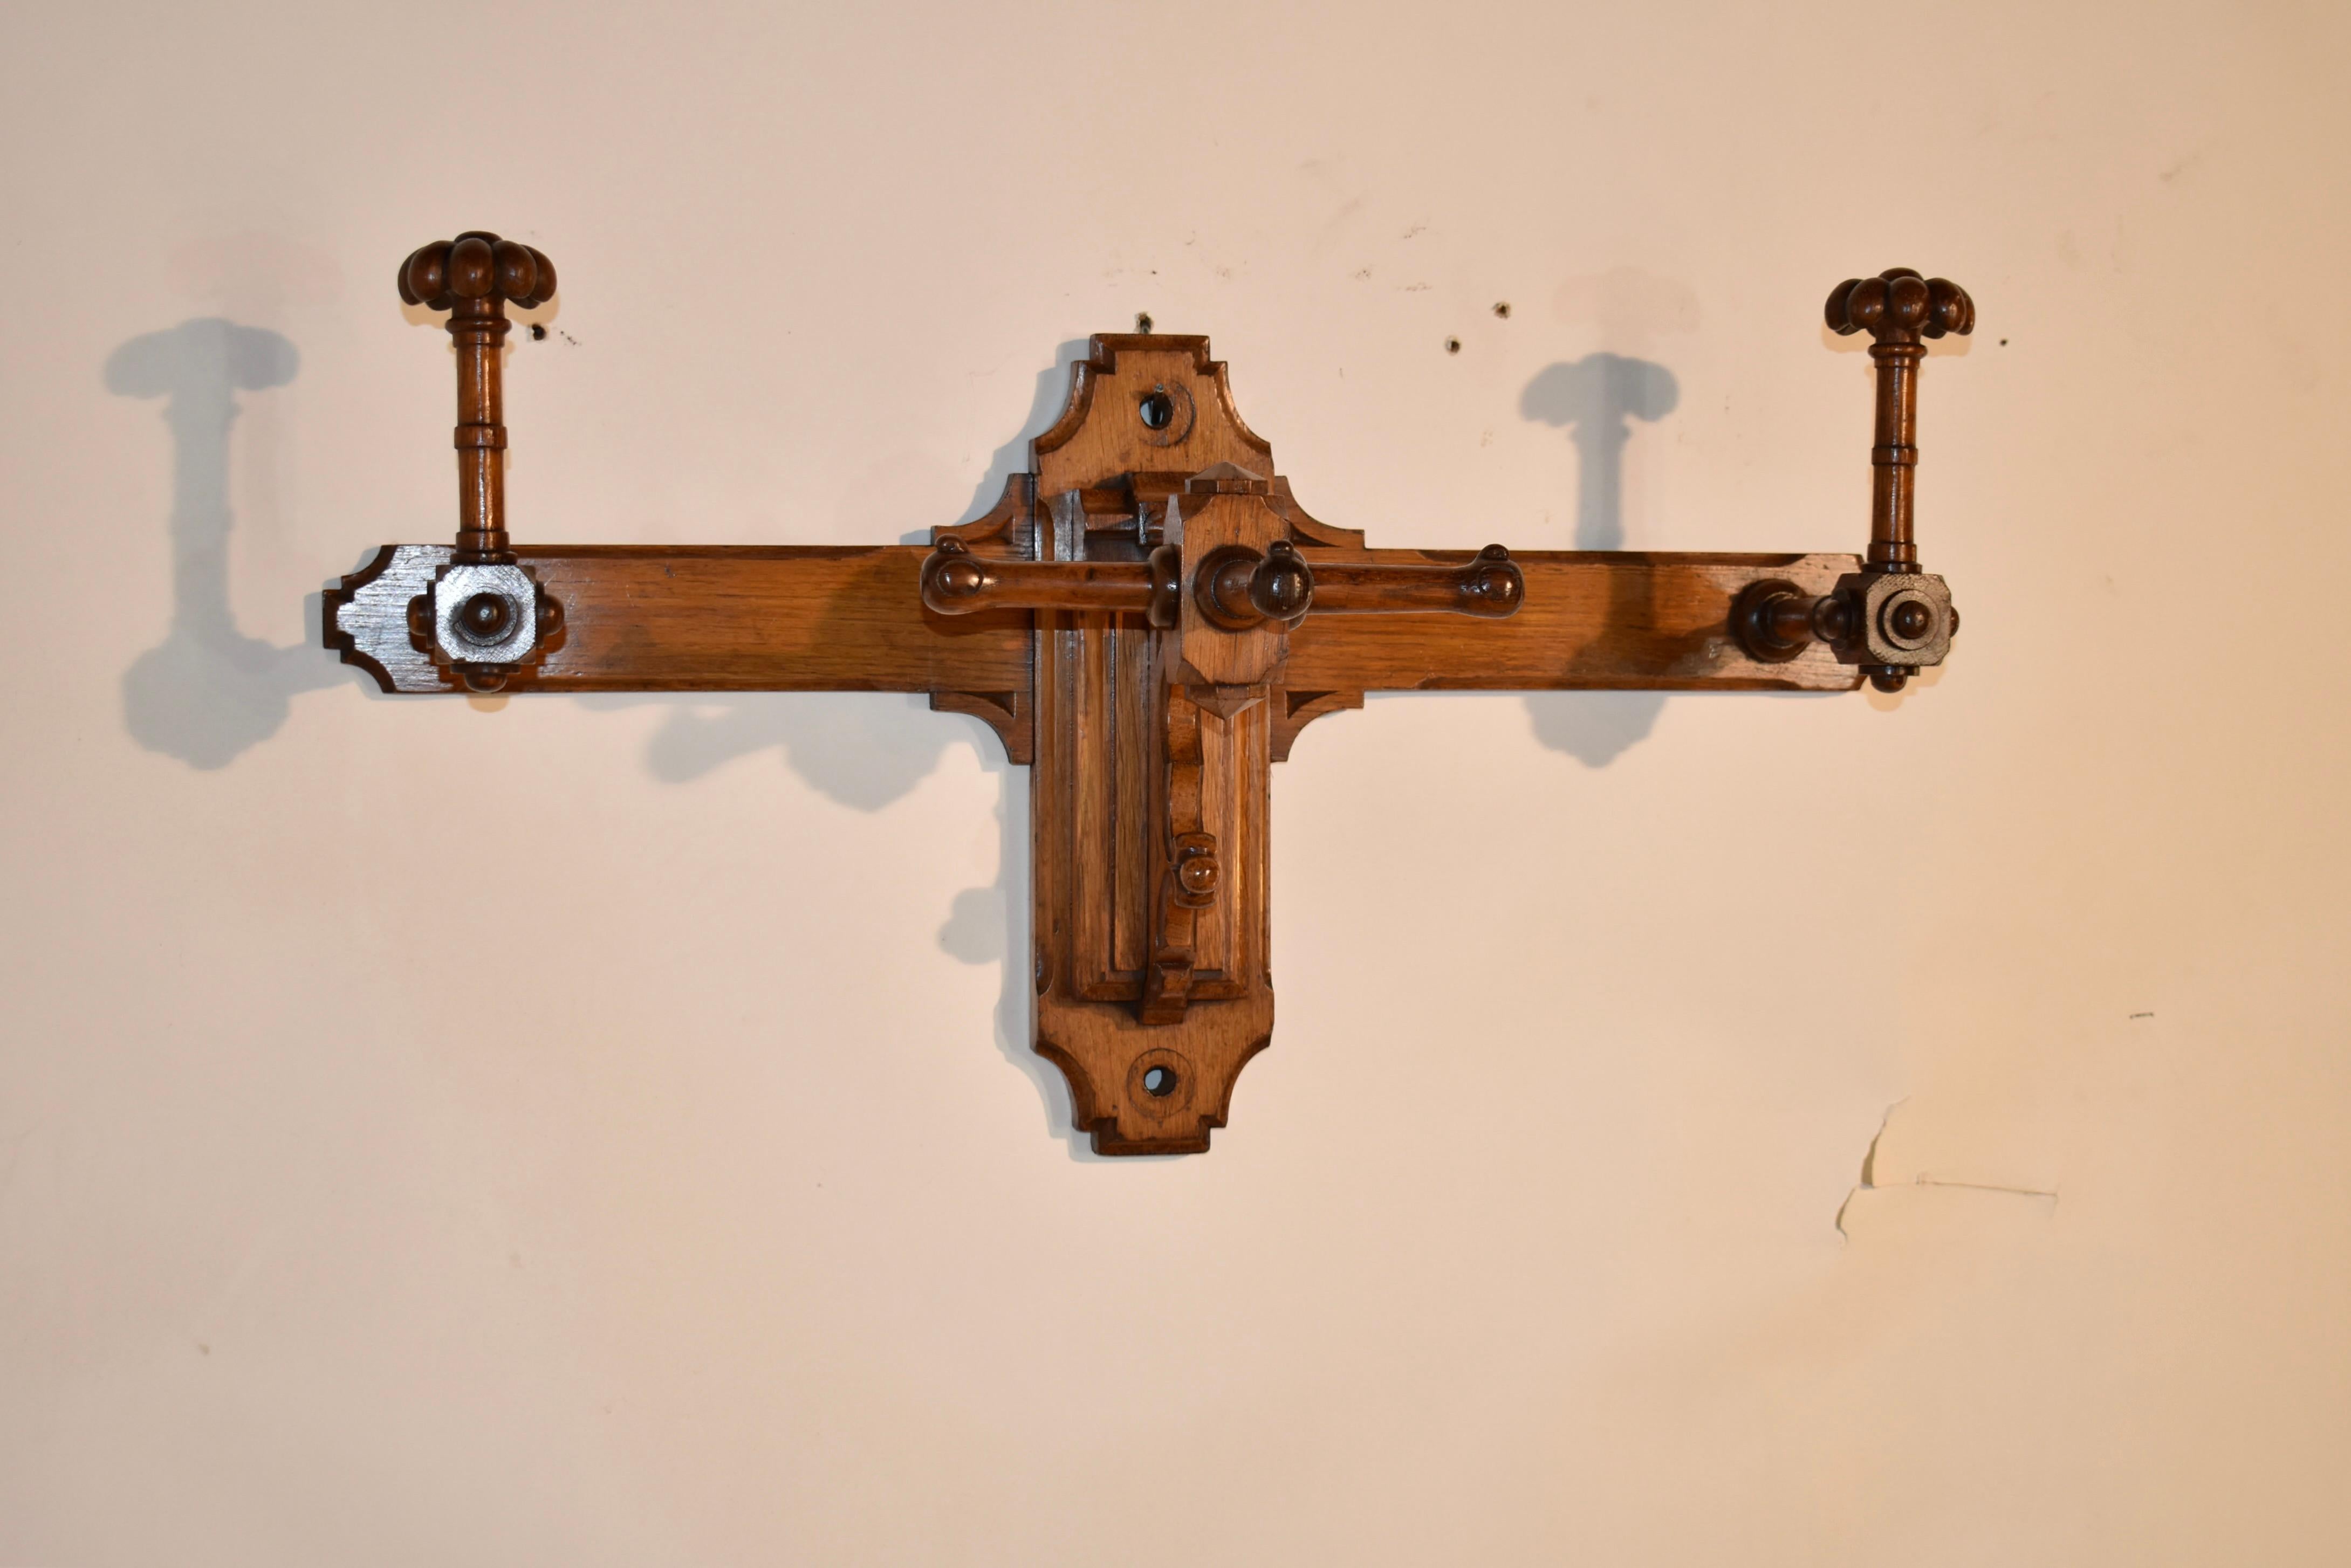 19th century oak coat and hat rack from England.  The piece attaches to the wall, and is handsomely turned and shaped for added design detail to any small space.  The back is shaped , and has hat pegs that extend from the back.  The tops of the pegs